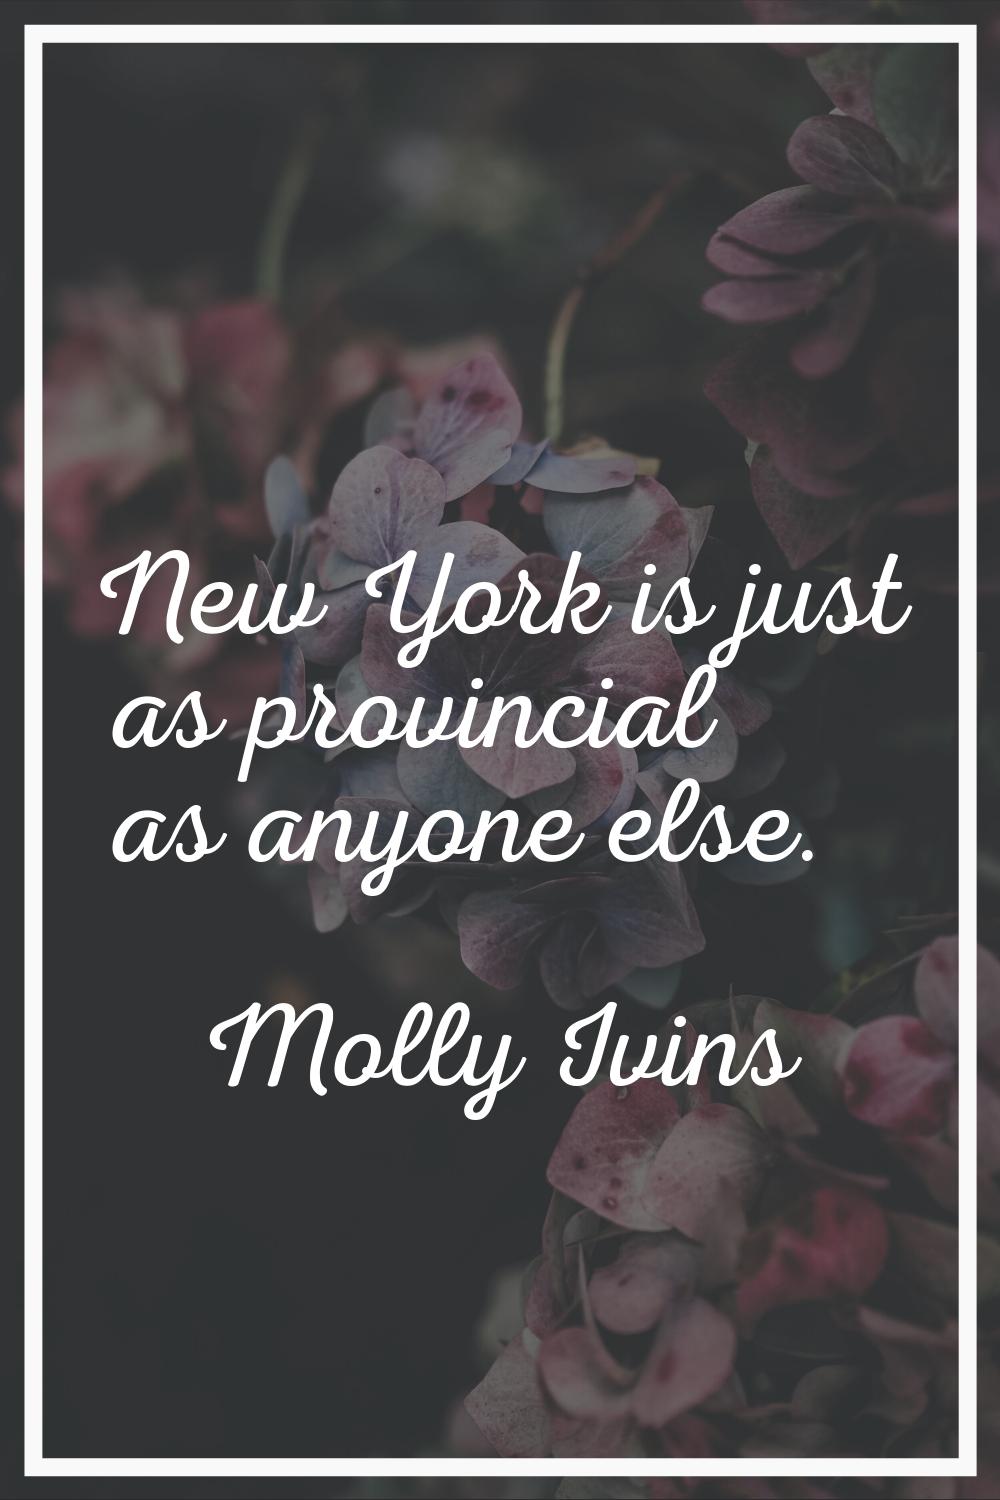 New York is just as provincial as anyone else.